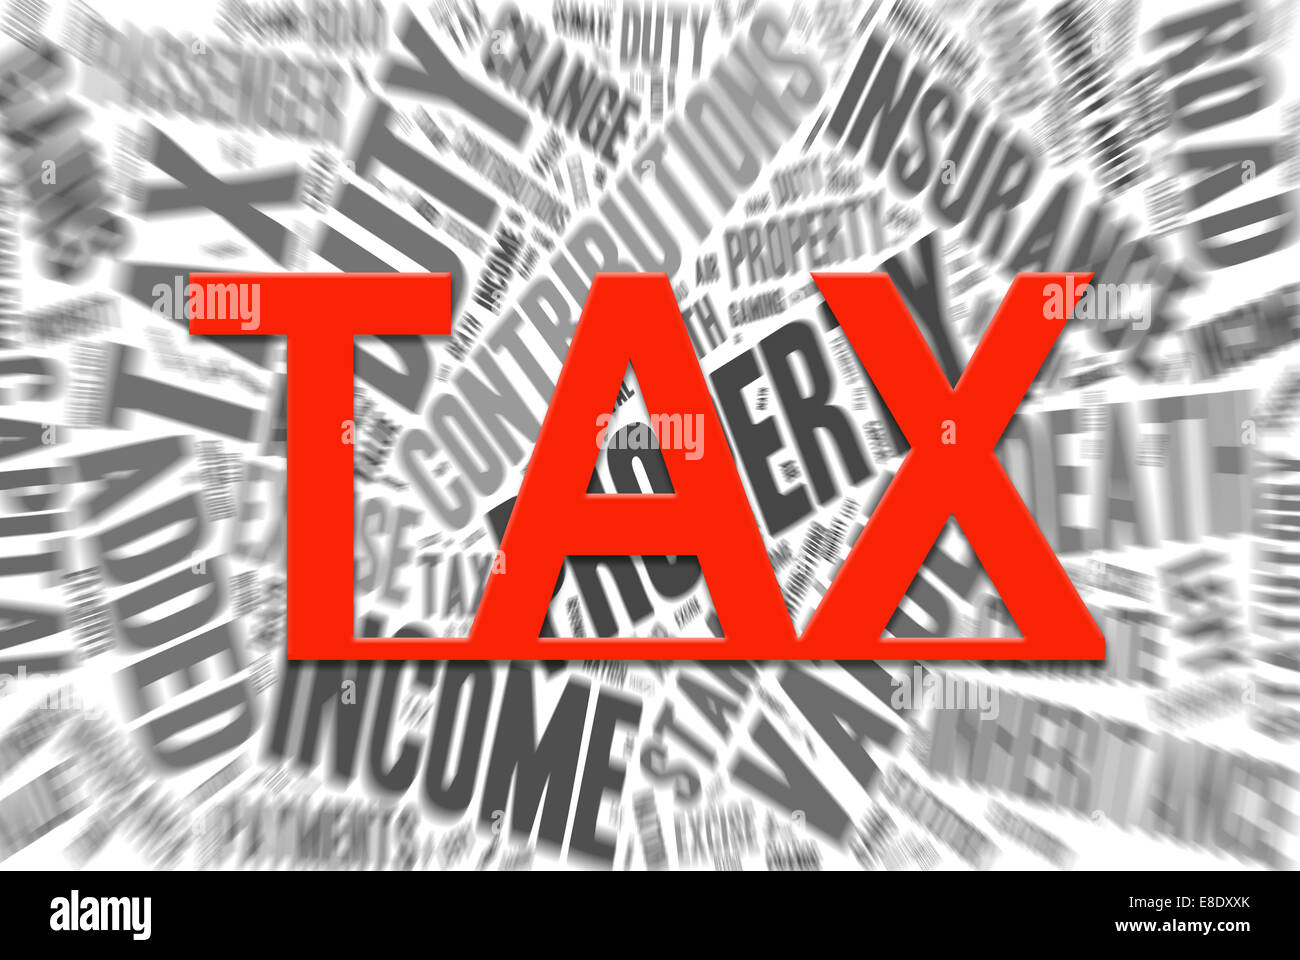 Collection of words referring to taxes in the UK. Stock Photo